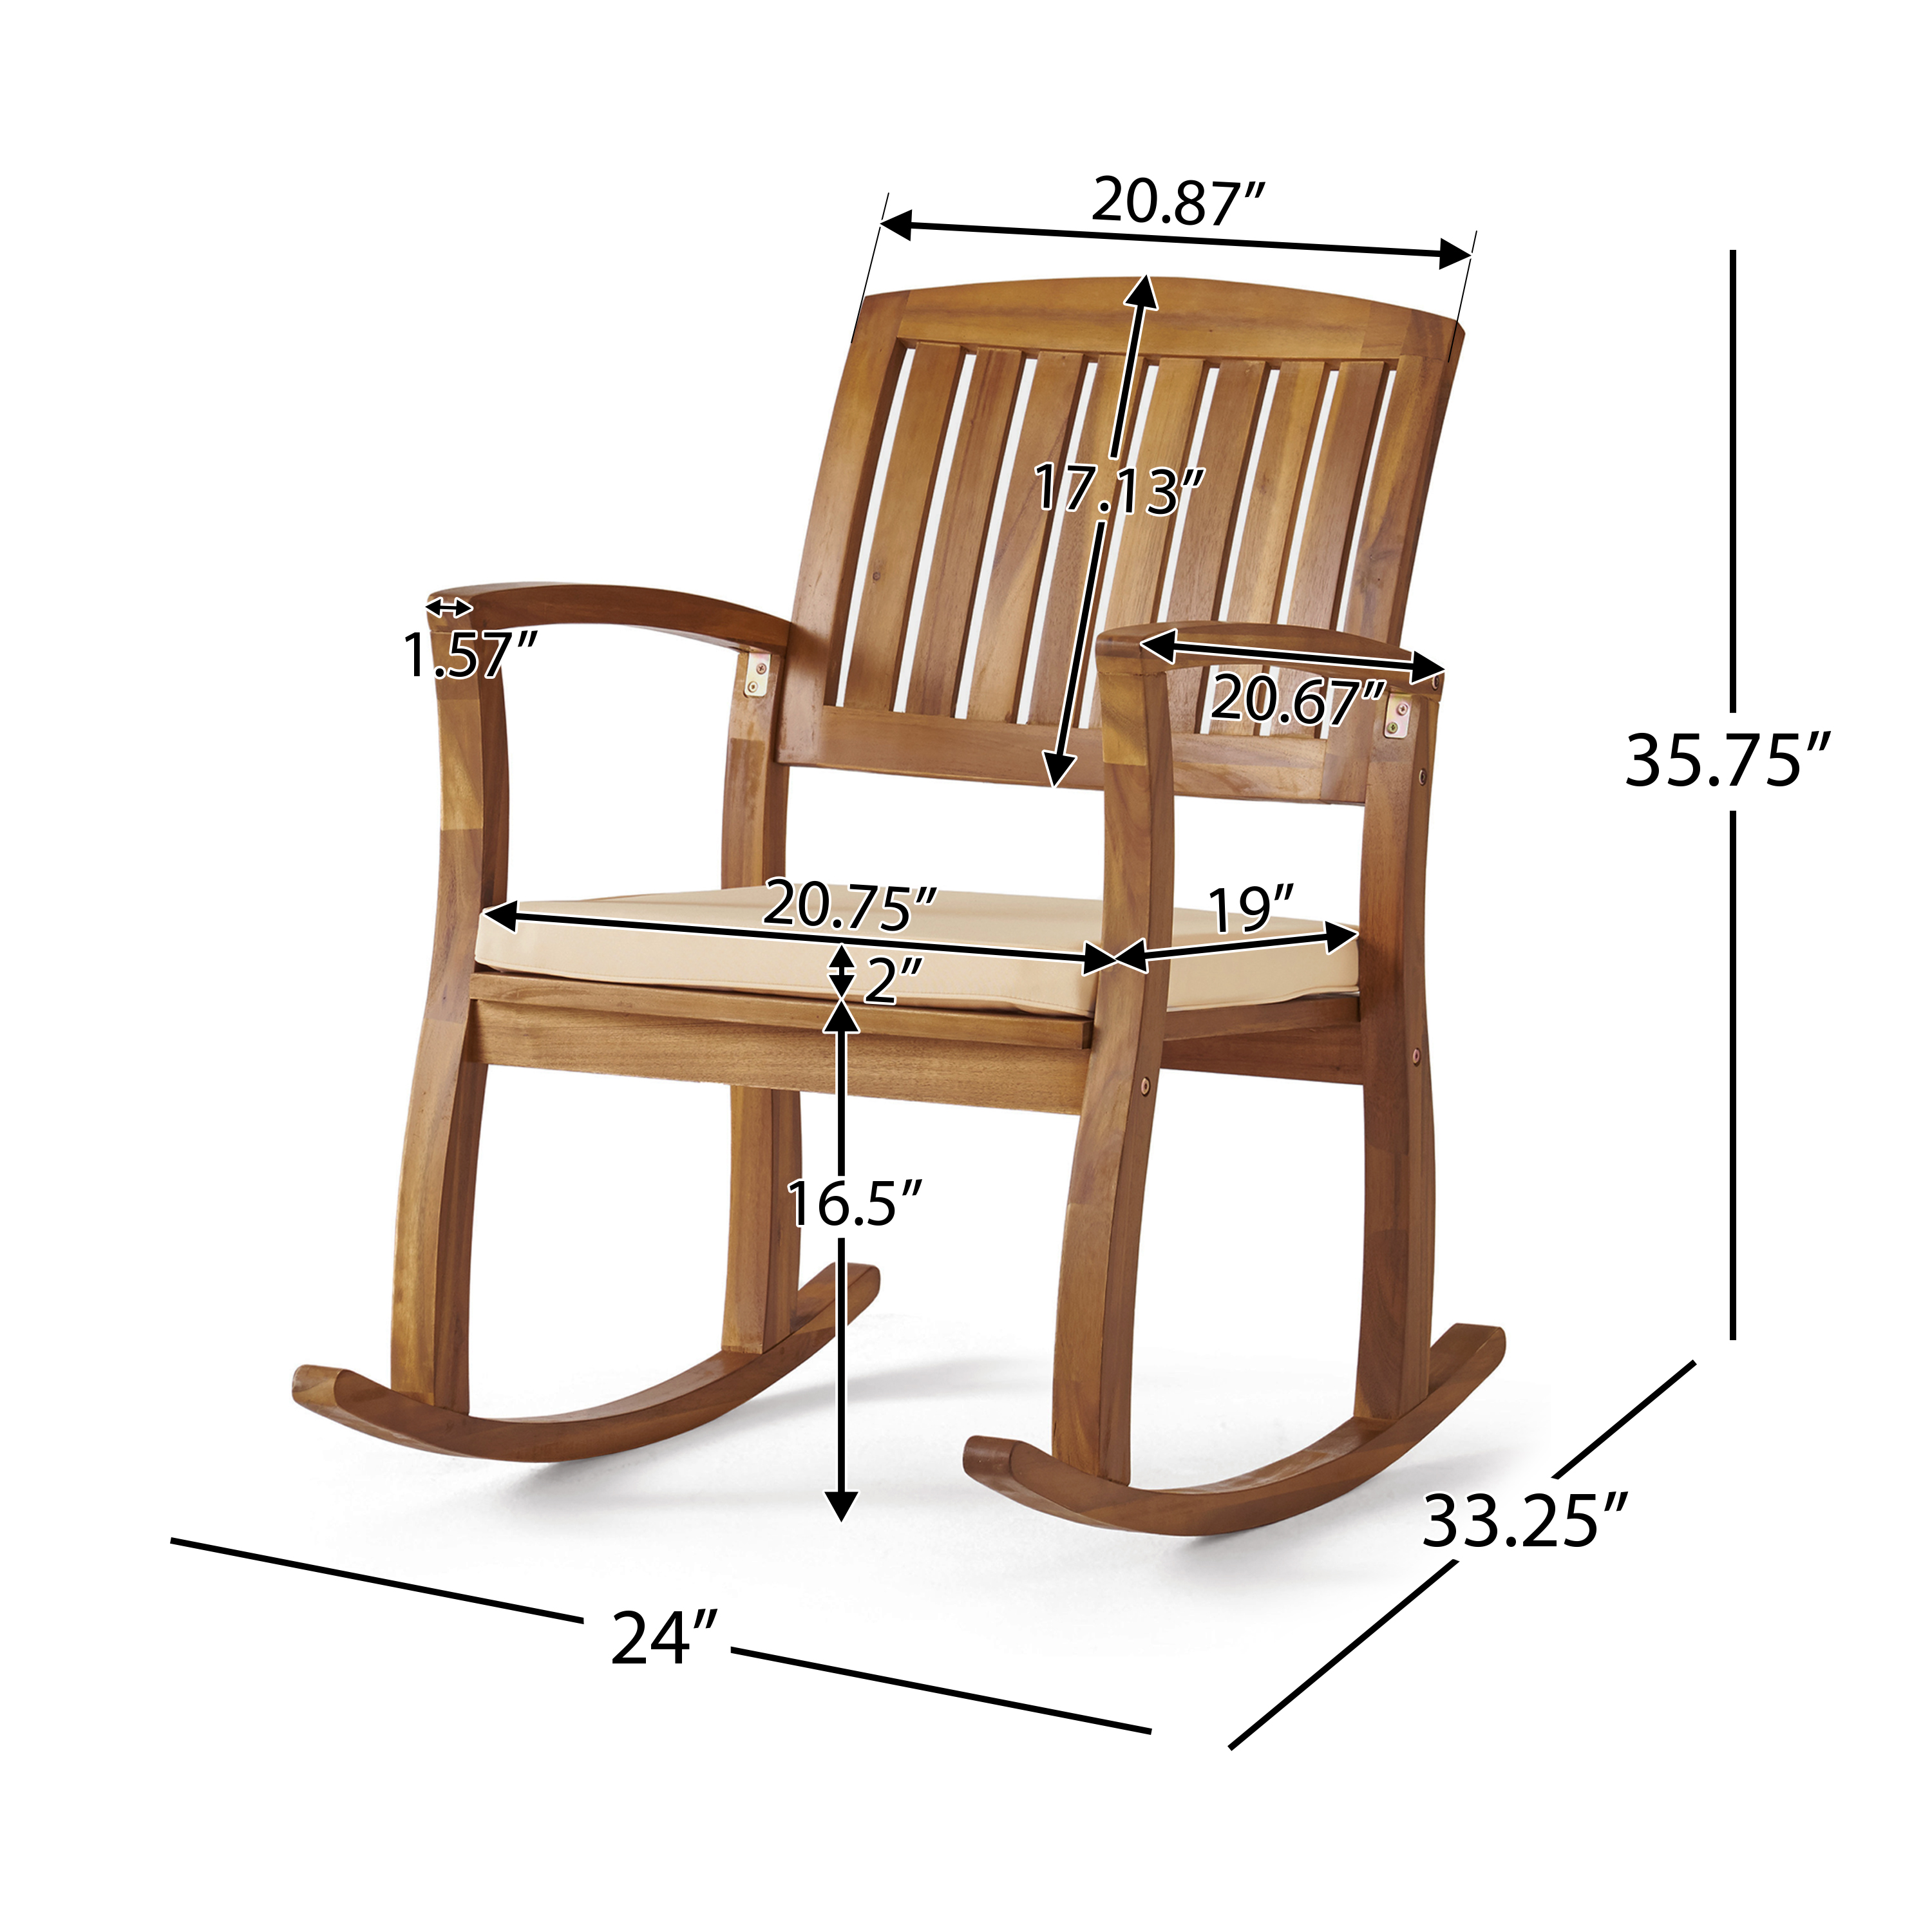 GDF Studio Amber Outdoor Acacia Wood Rocking Chair with Cushion, Teak and Cream Off-White - image 3 of 12